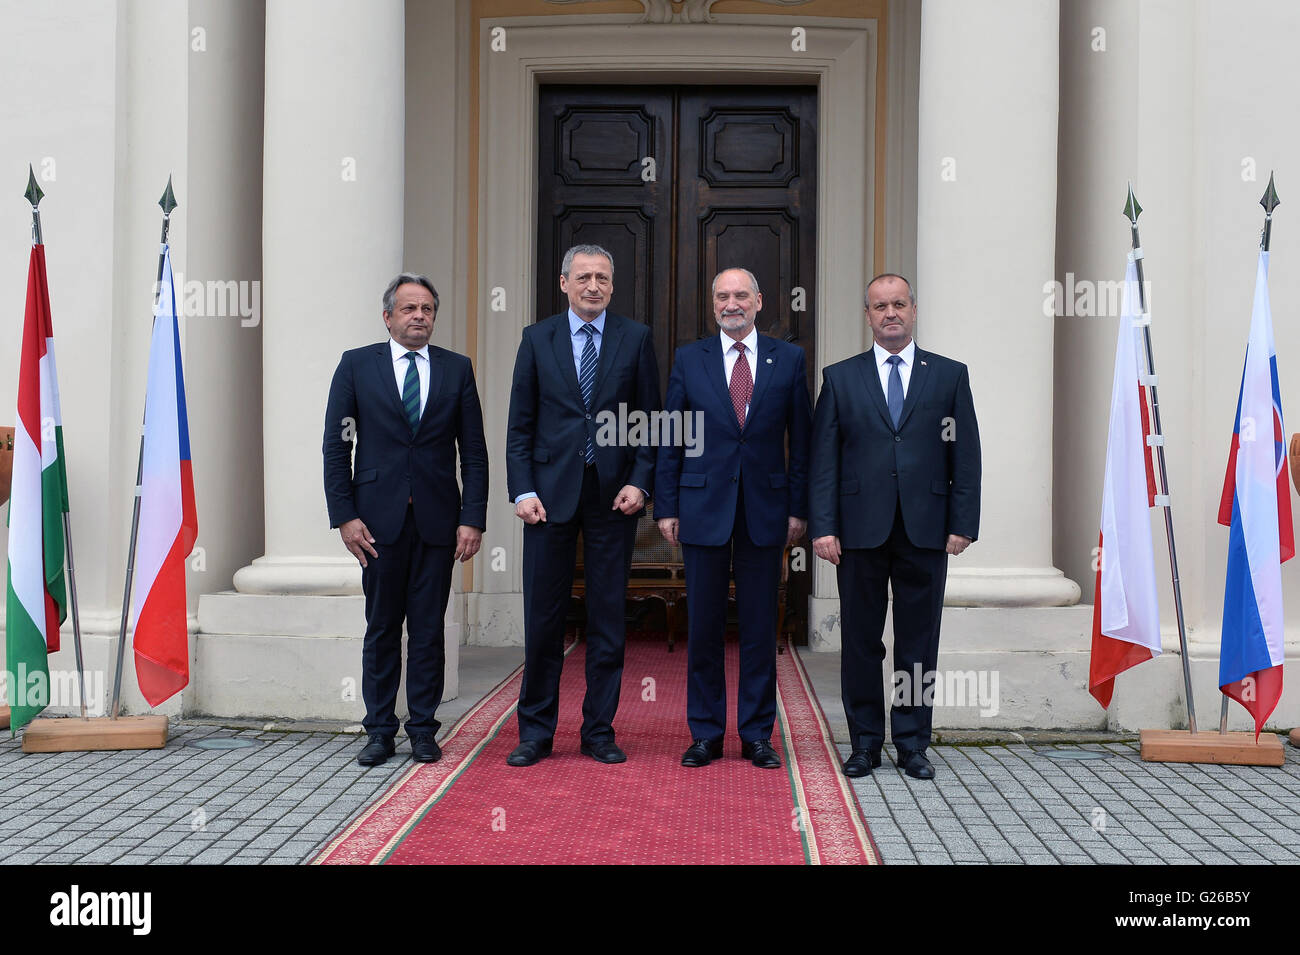 Liblice, Czech Republic. 25th May, 2016. From left to right, Hungarian Defense Minister Tomas Vargha, Czech Defense Minister Martin Stropnicky, Polish Defense Minister Antoni Macierewicz and Slovak Defense Minister Peter Gajdos pose for photo during a meeting of defense ministers of the Visegrad Group at the chateau in Liblice, Czech Republic, May 25, 2016. Credit:  Katerina Sulova/CTK Photo/Alamy Live News Stock Photo